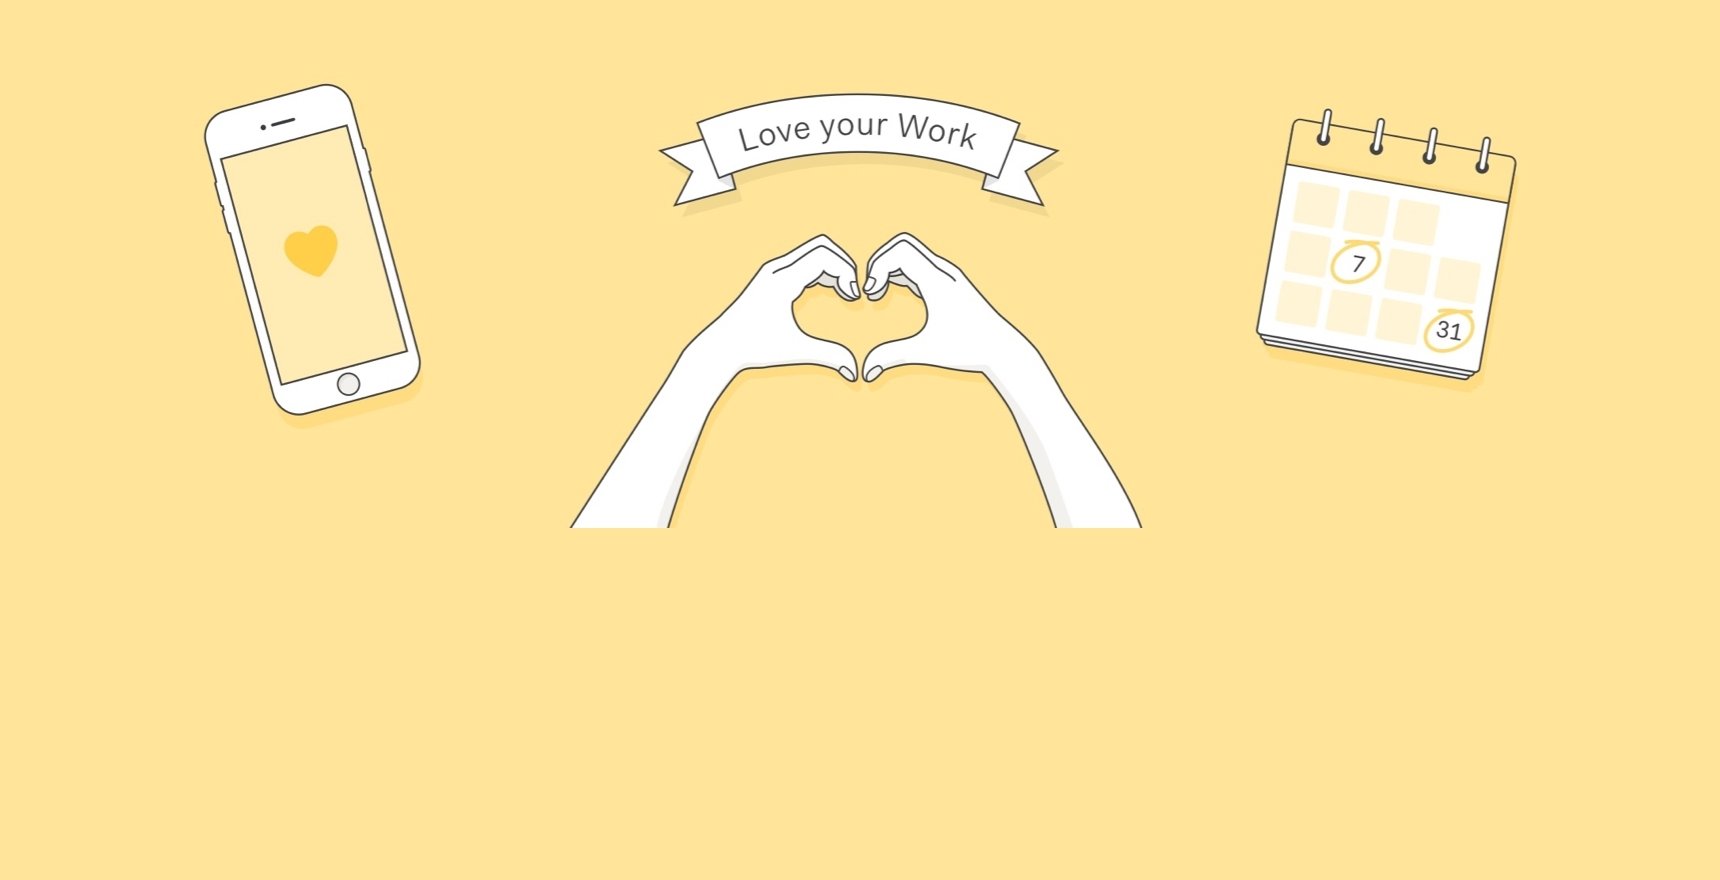 Love your work graphic with hands as a heart, phone, and calendar